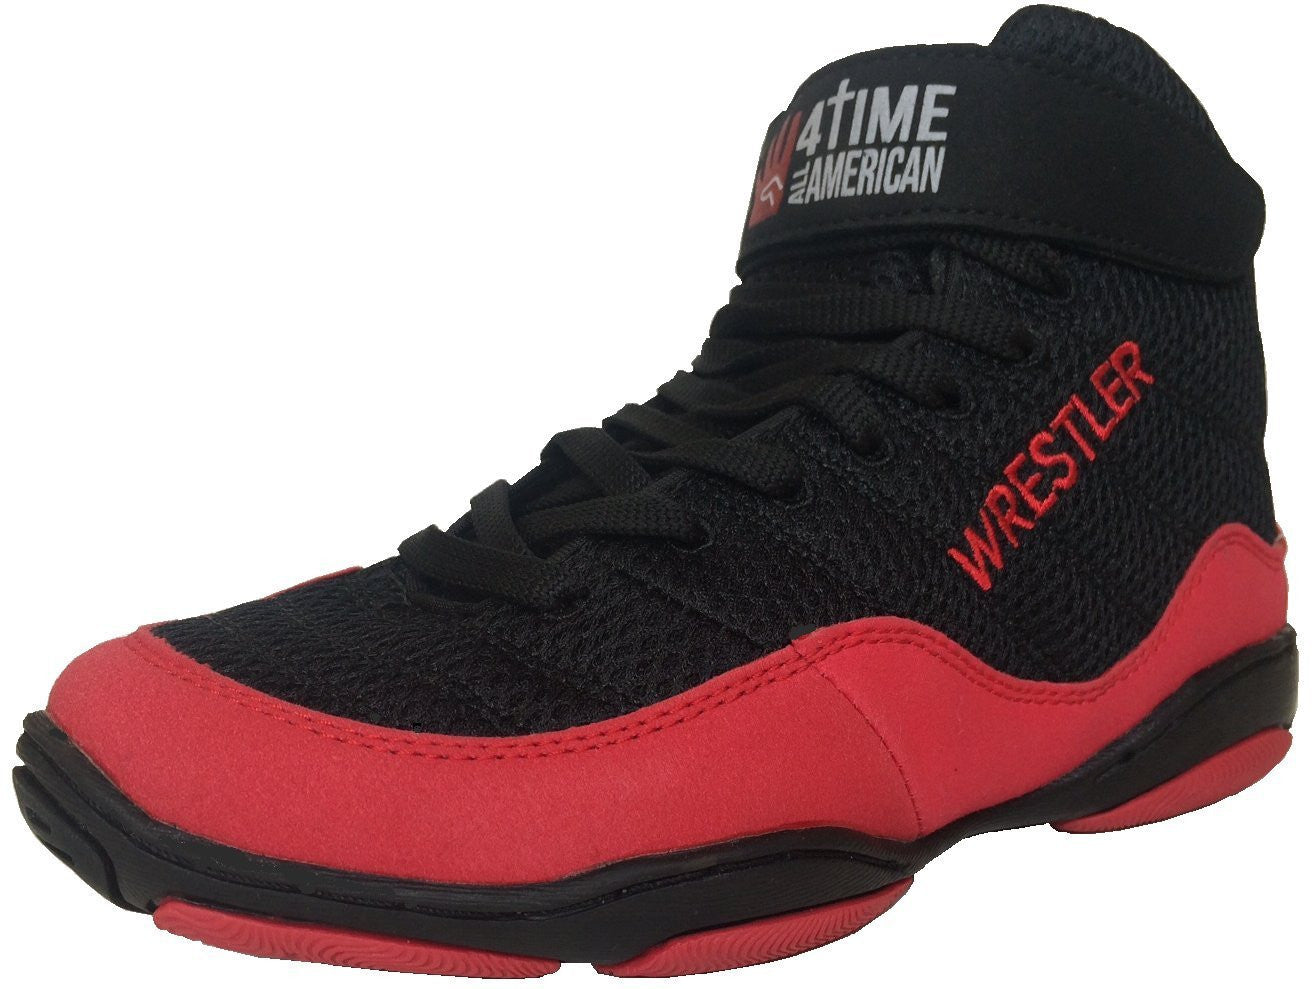 Red Wrestling Shoes